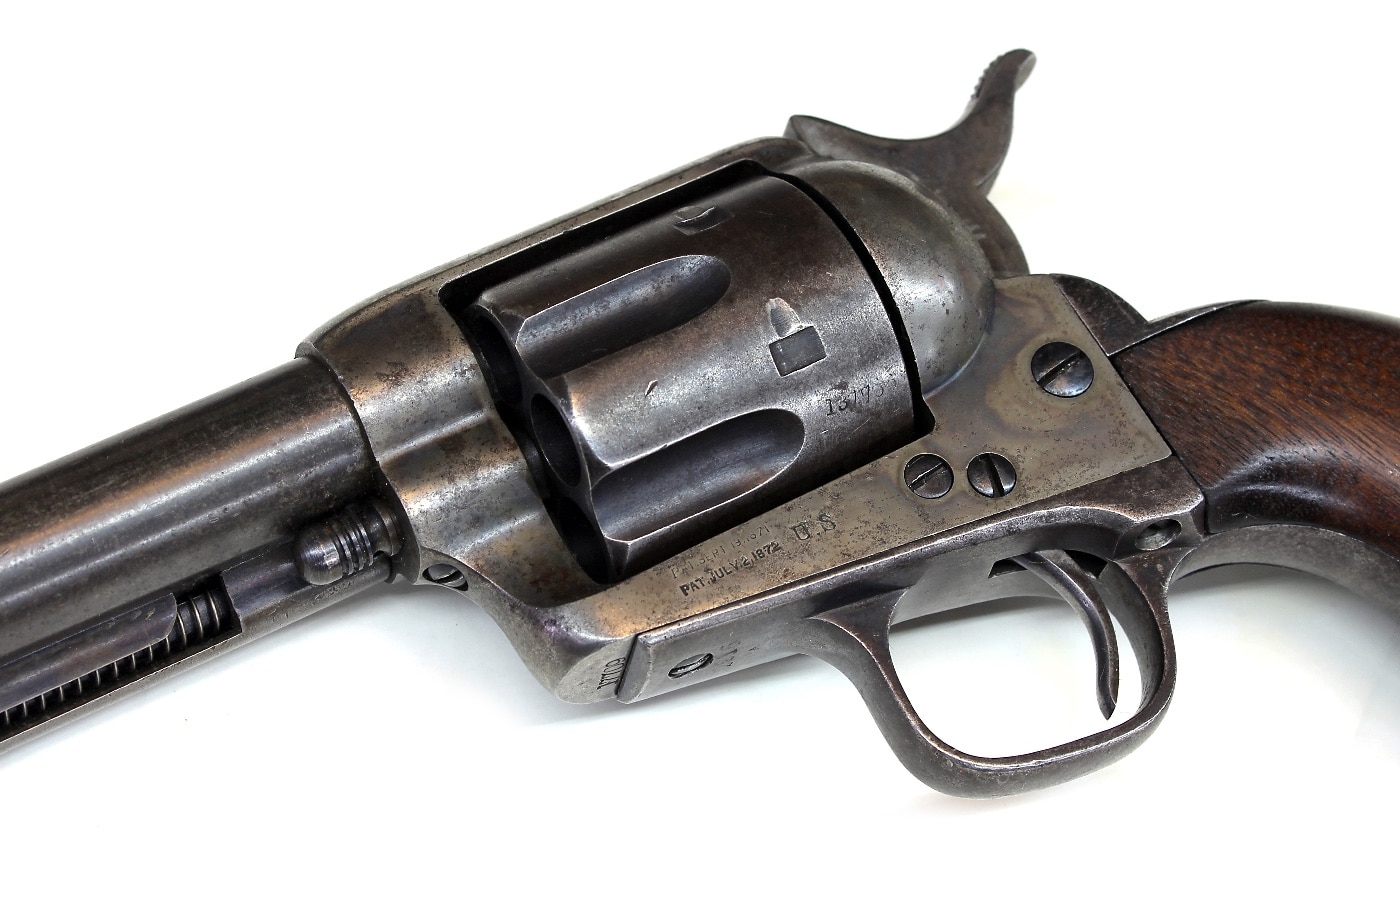 Shown here is an original Single Action Army revolver. Popular with collectors, the original revolvers were carried by members of the United States military. The guns were made by Colt.